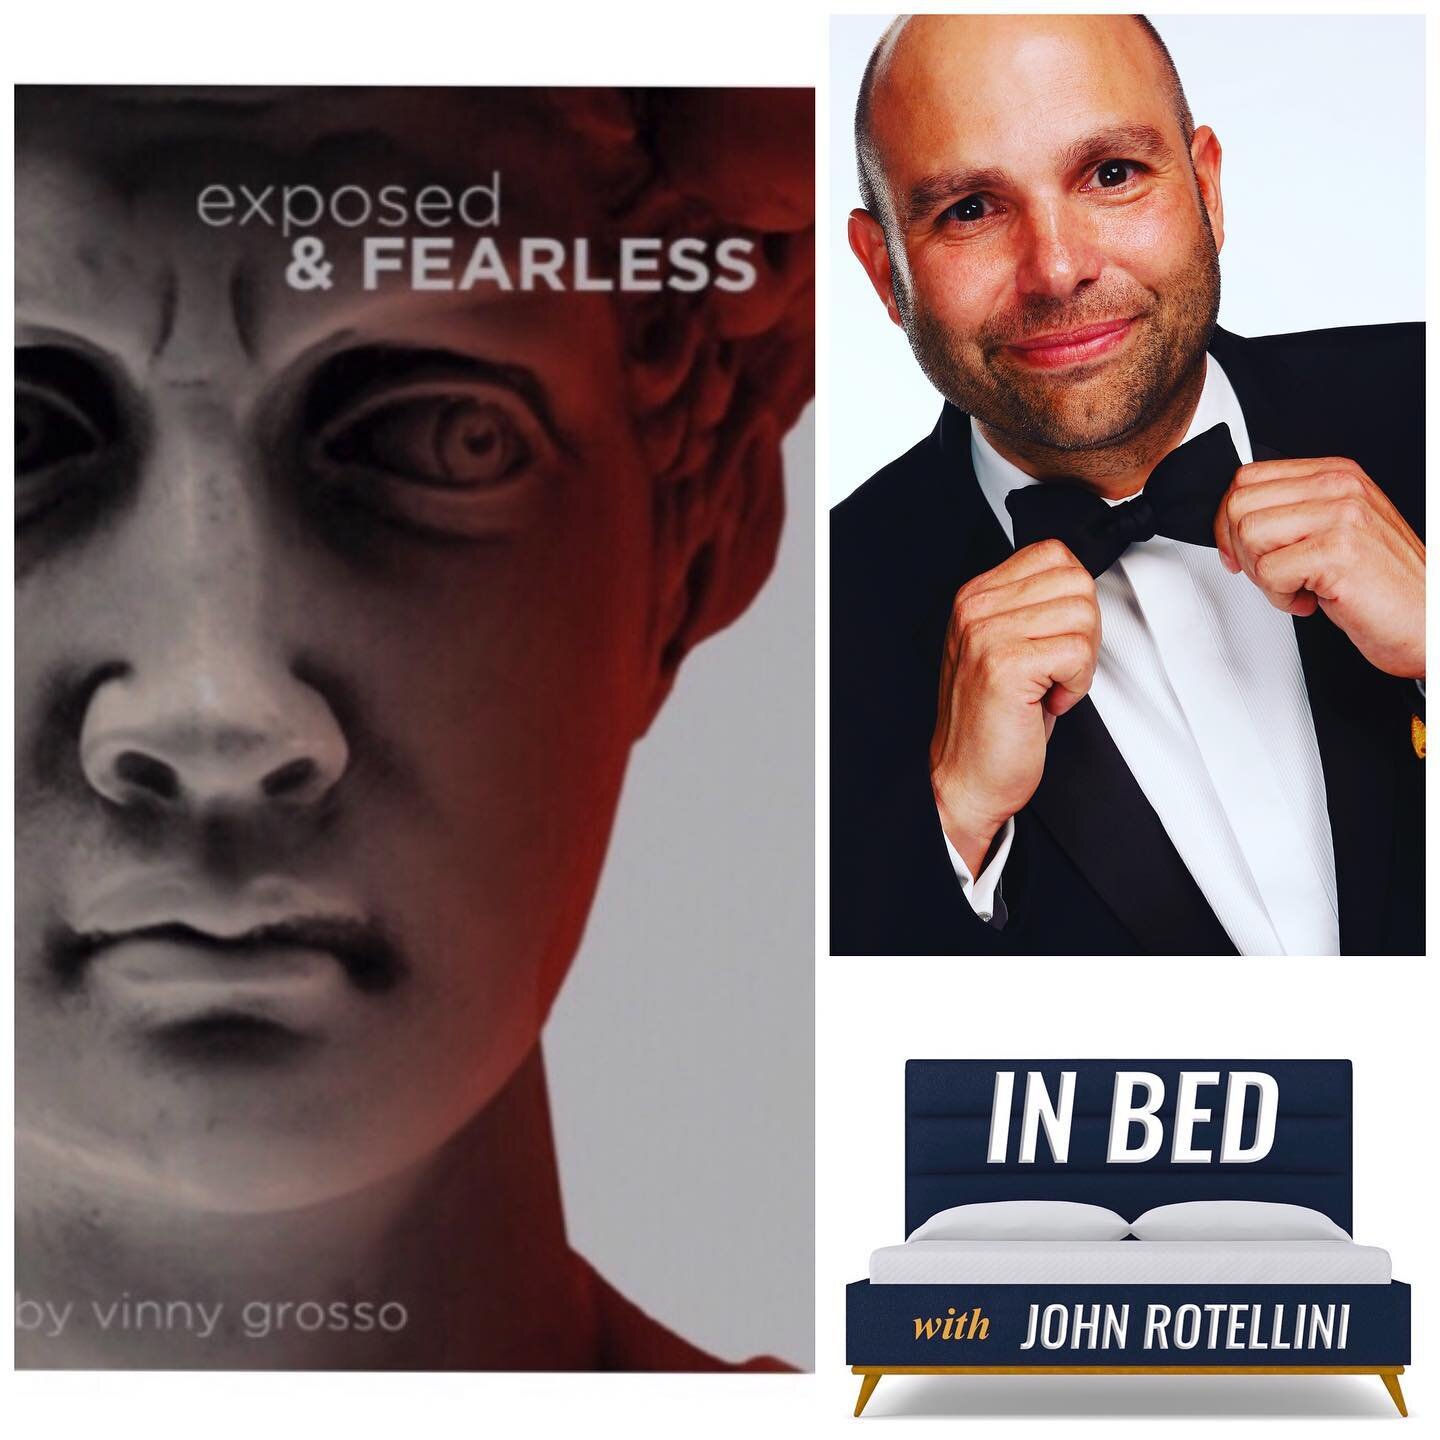 Episode 1 is FINALLY HERE!  John joins magician, author, producer and all around great guy @vinnygrosso in his Las Vegas home. 
Listen on @applepodcasts, @stitcherpodcasts, @spotify, @googleplaymusic and JohnInBed.com.

In this episode, you can hear 